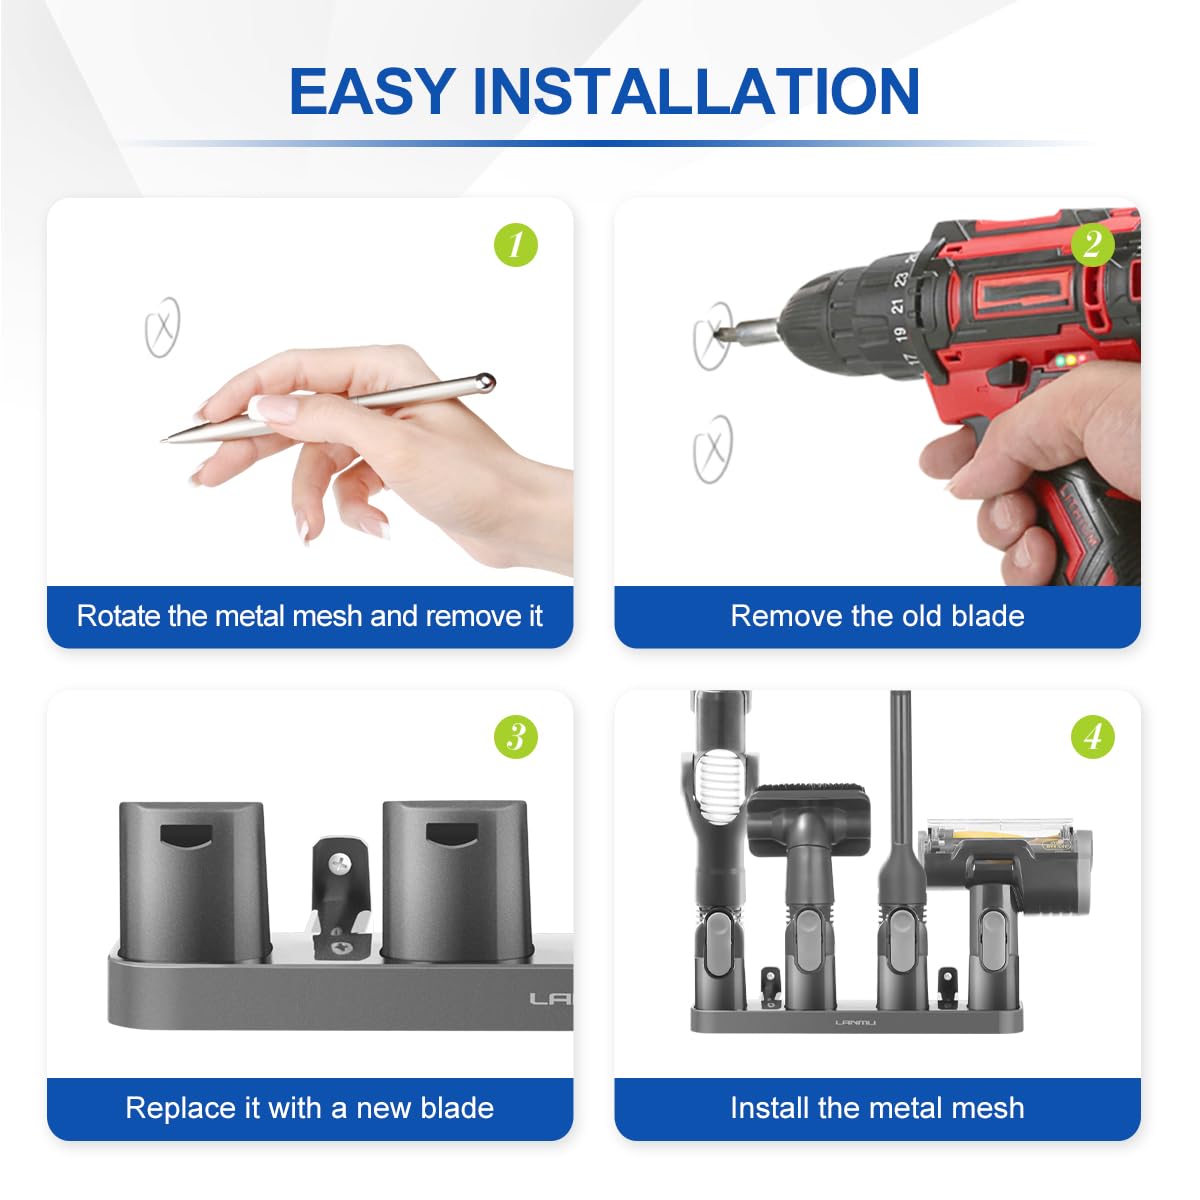 easy installation： rotate the metal mesh and remove it， remove the old blade， replace it with a new blade， install the metalimesh